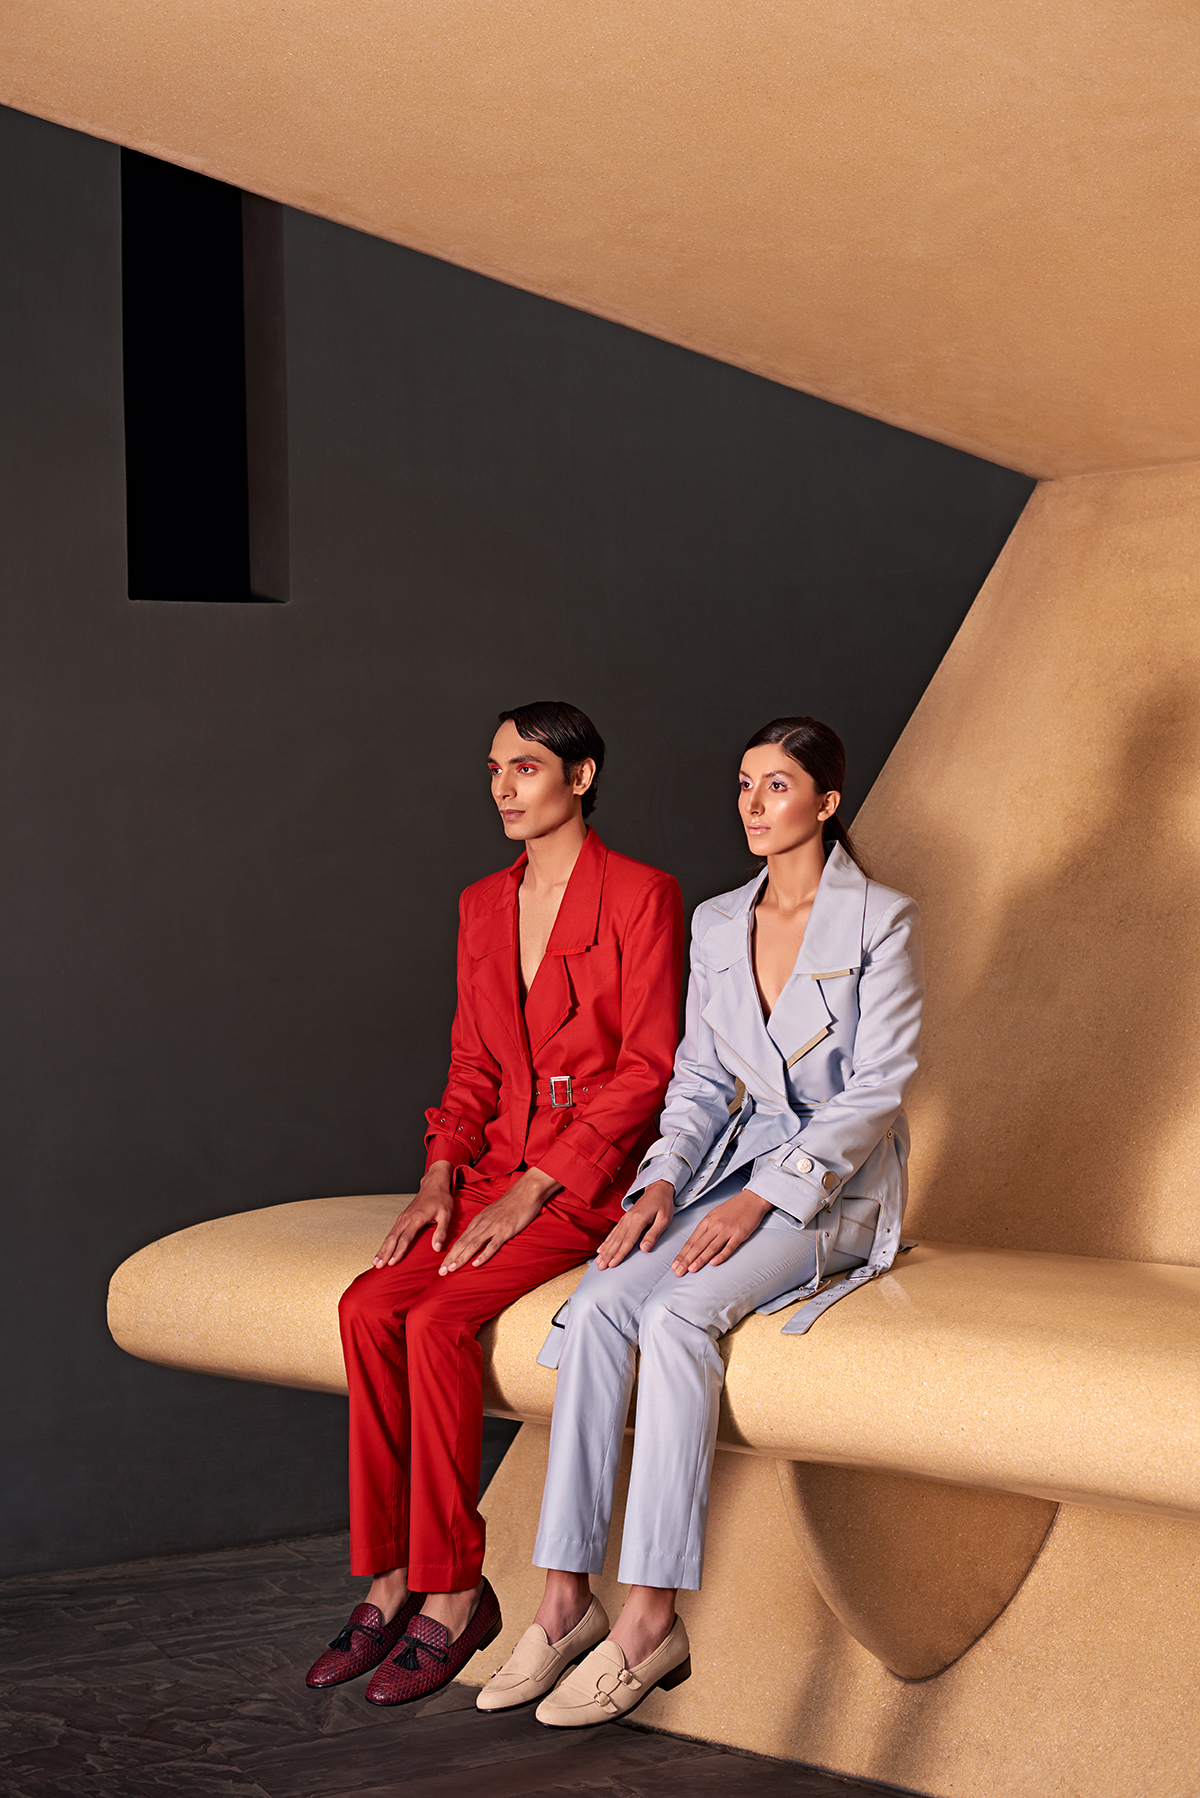 Two models sitting on a step